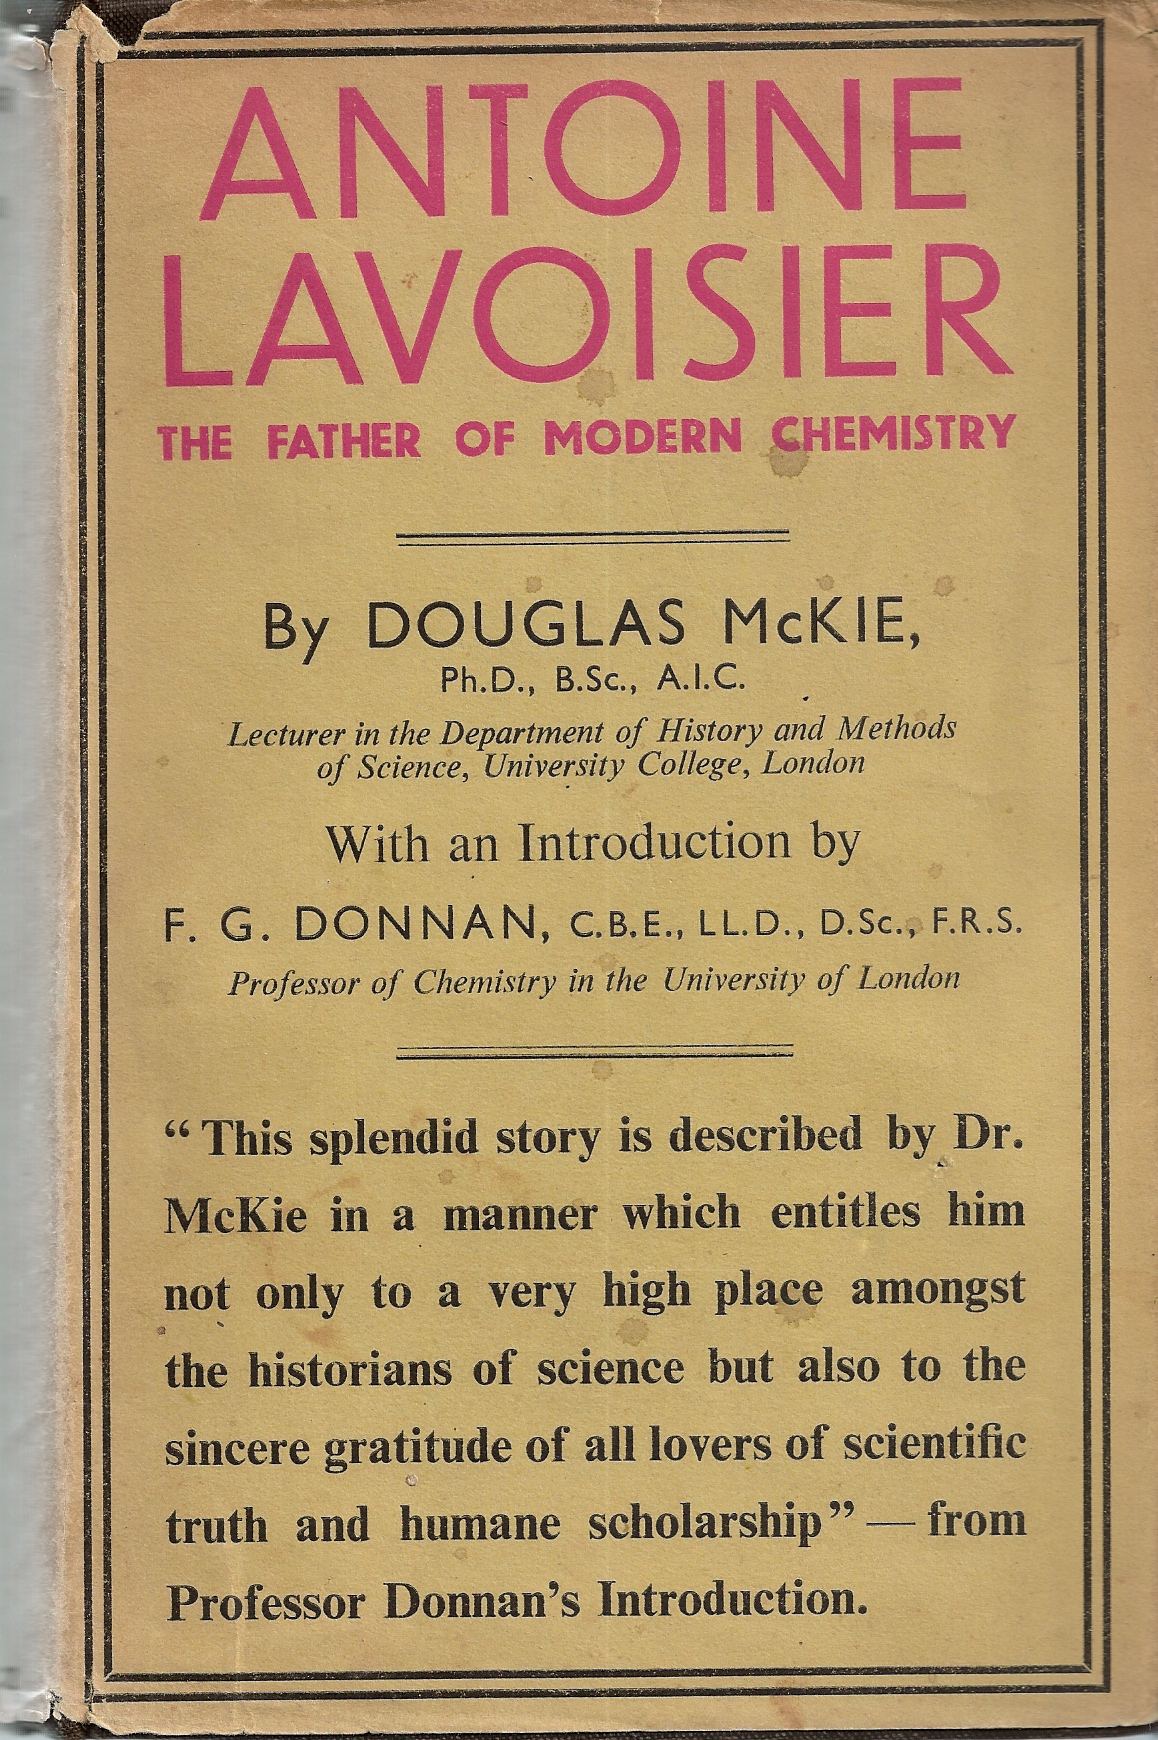 MCKIE DOUGLAS, F. G. DONNAN, INTRODUCTION - Antoine Lavoisier the Father of Modern Chemistry